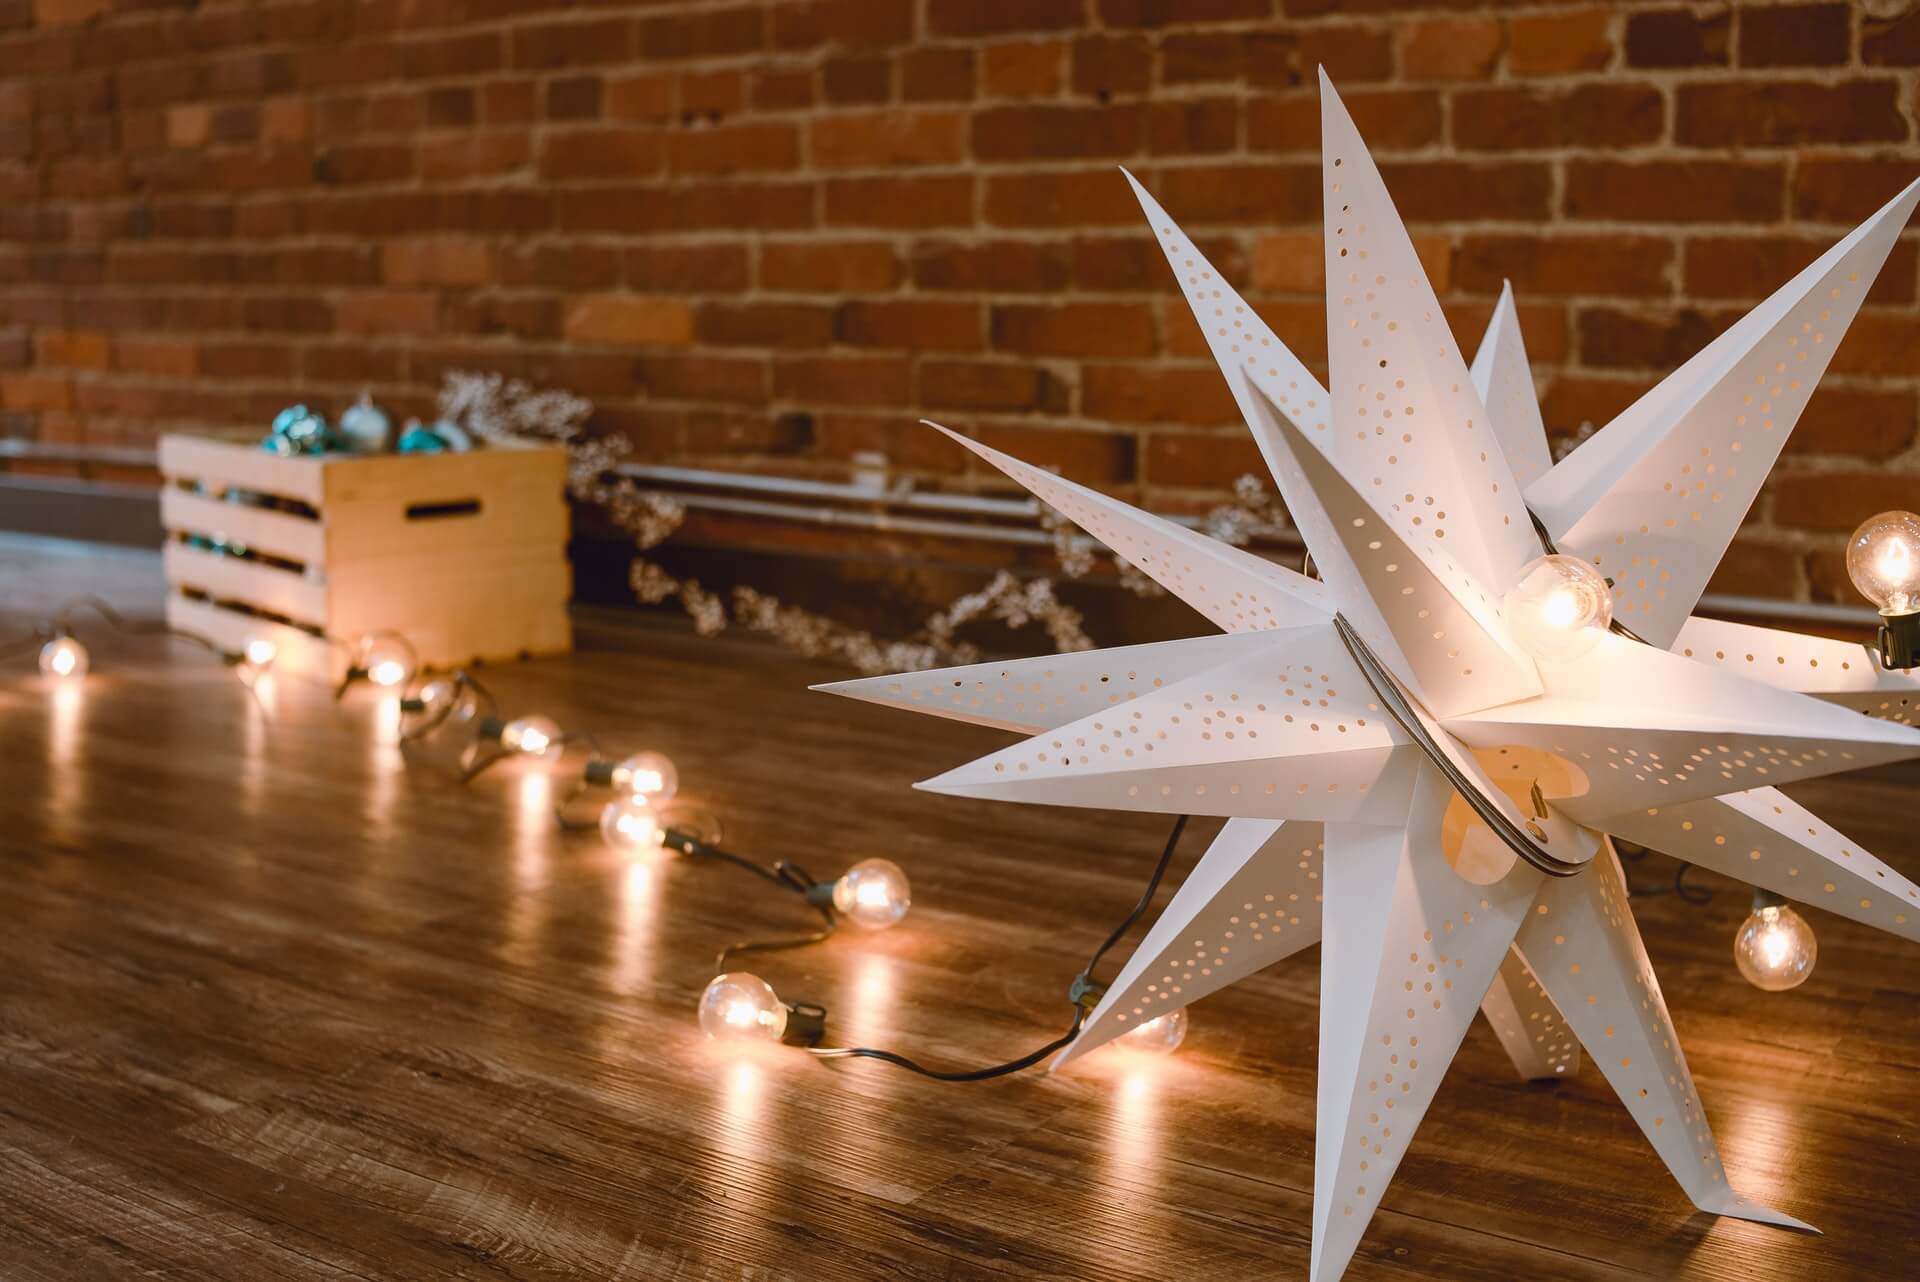 A star made of paper. How to make it step by step?